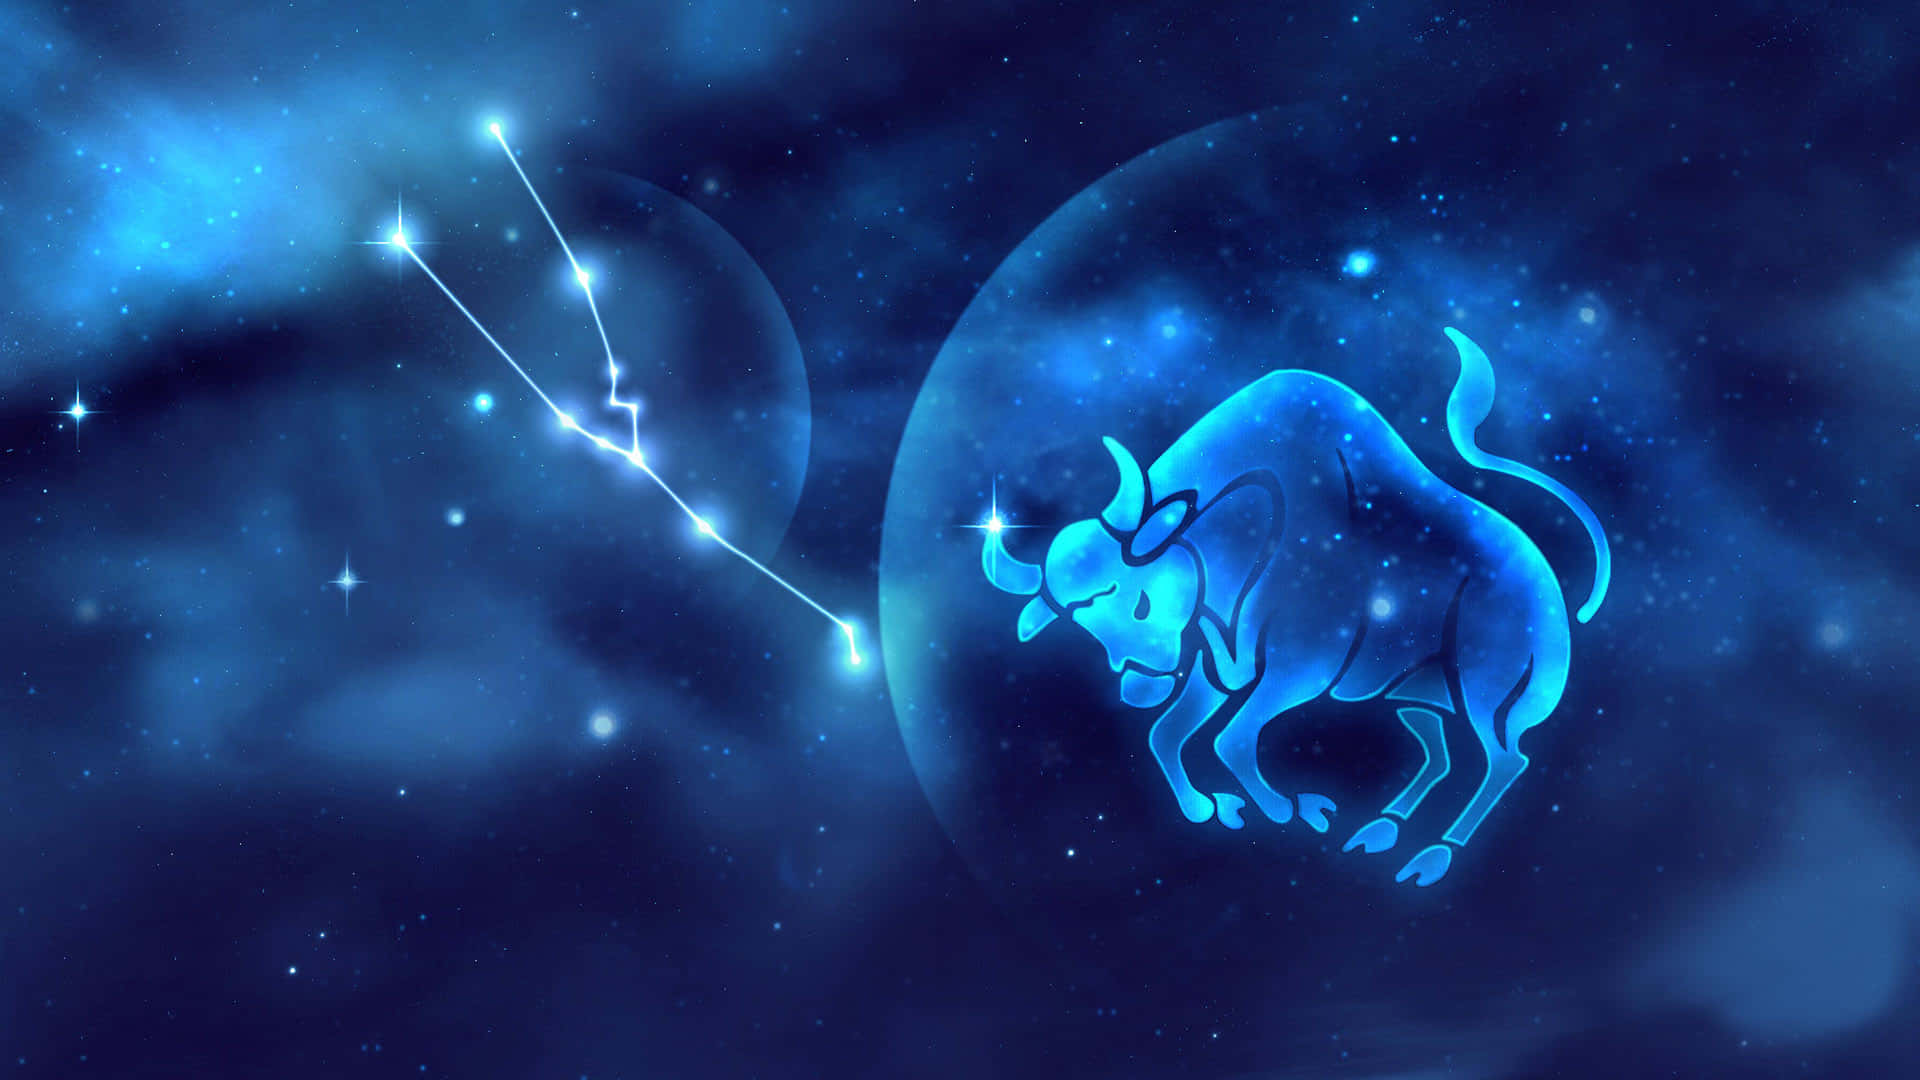 A Taurus Symbolizing Strength and Stability